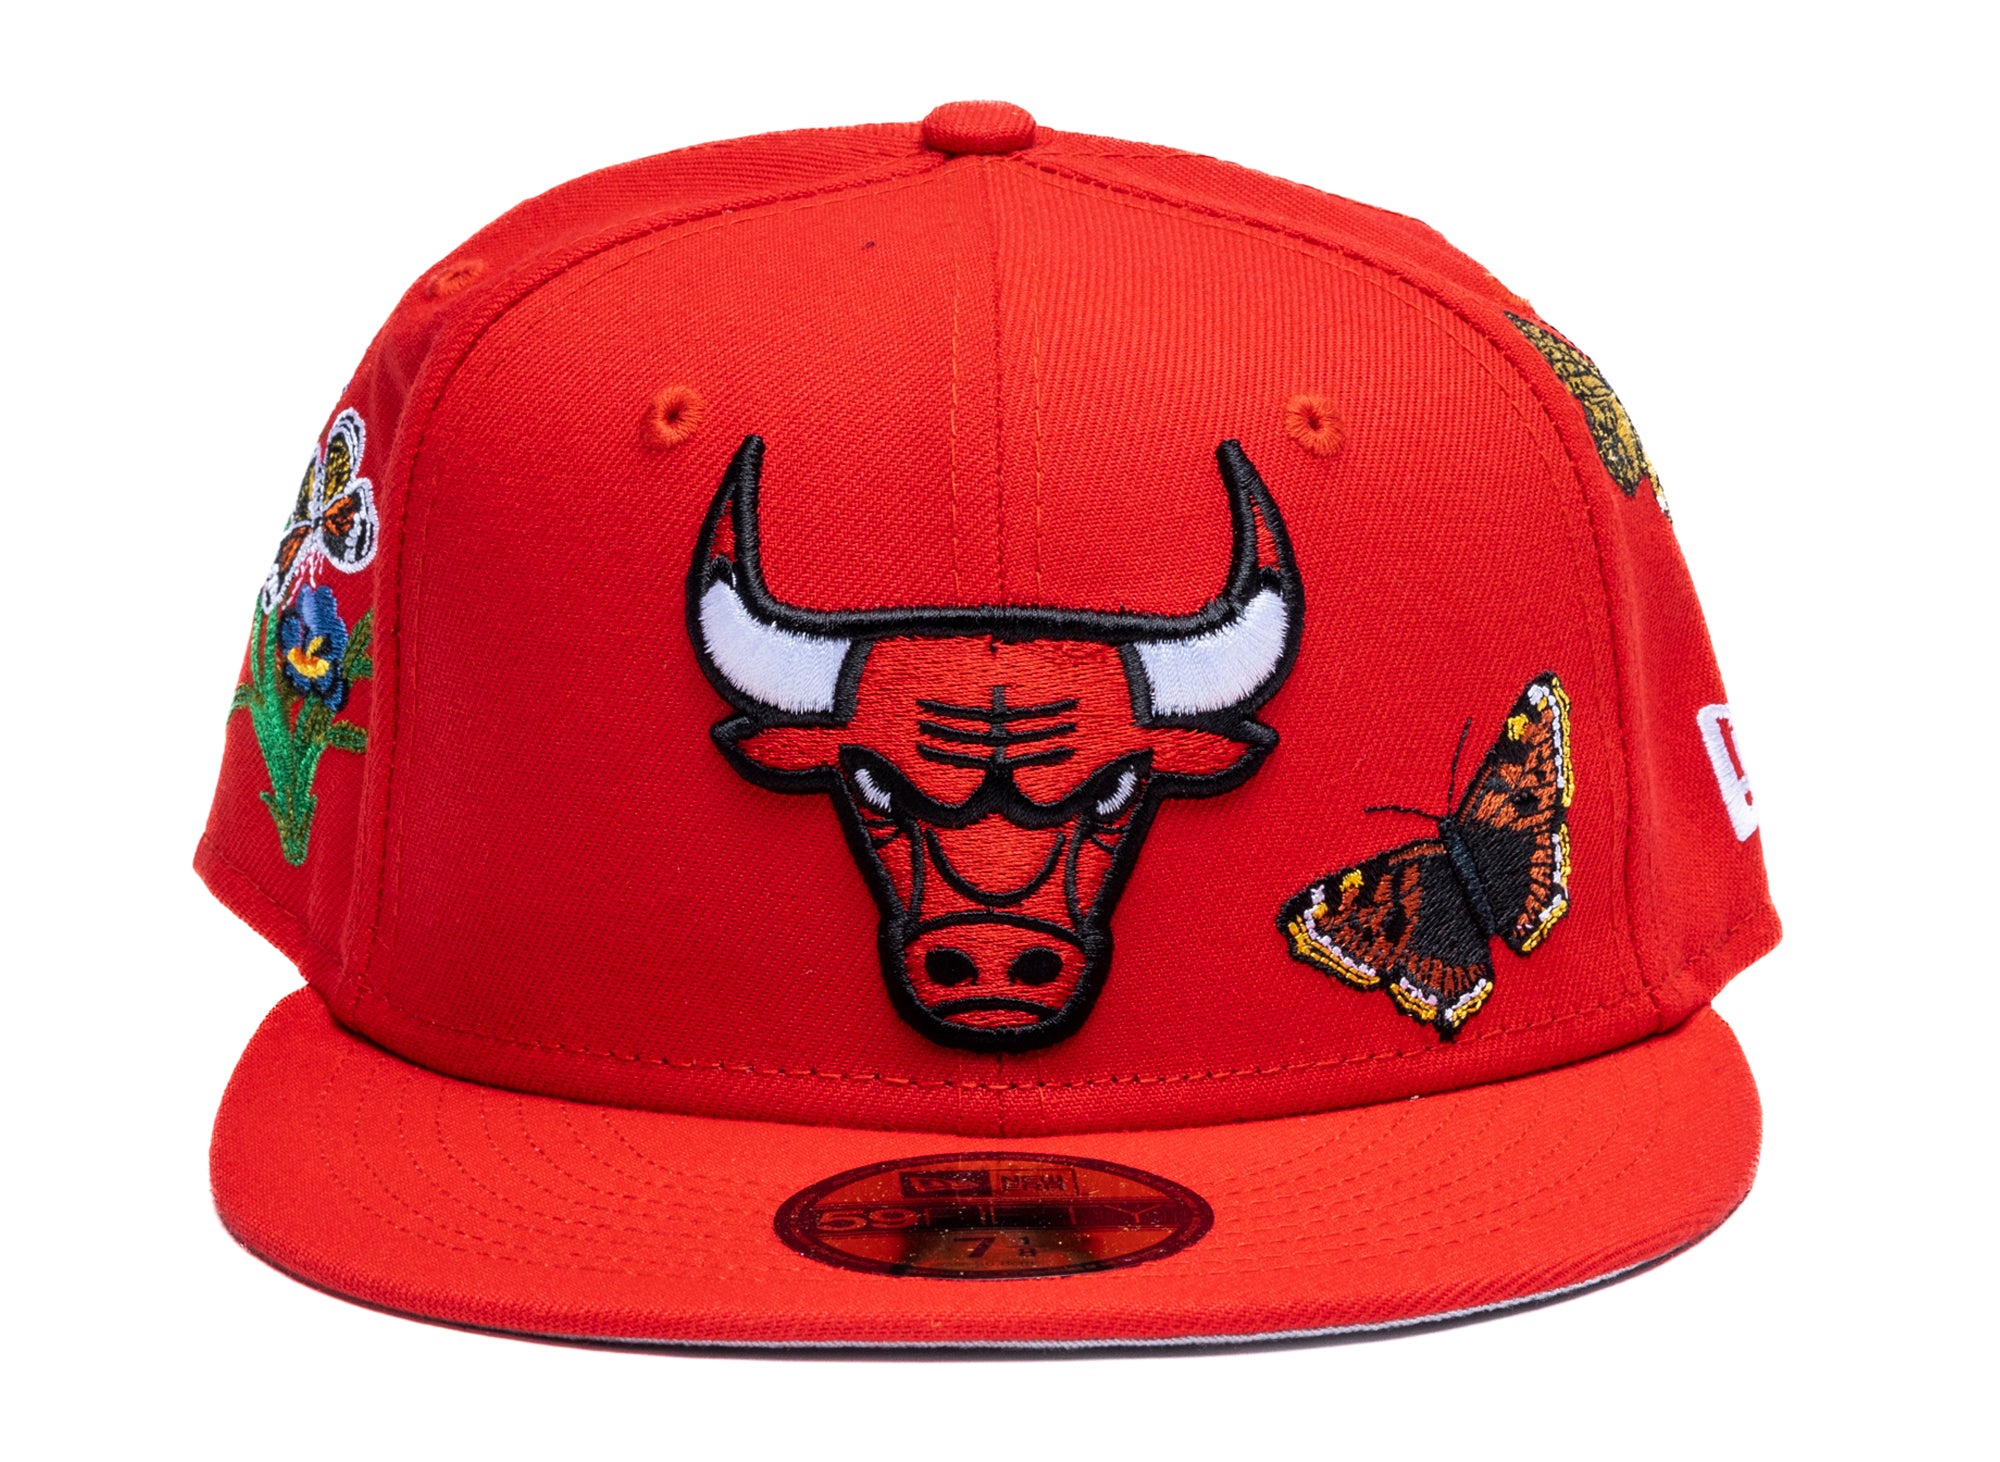 New colors in our Bulls hats are now available 🧢 #bulls #Chicago  #newcolors #hats